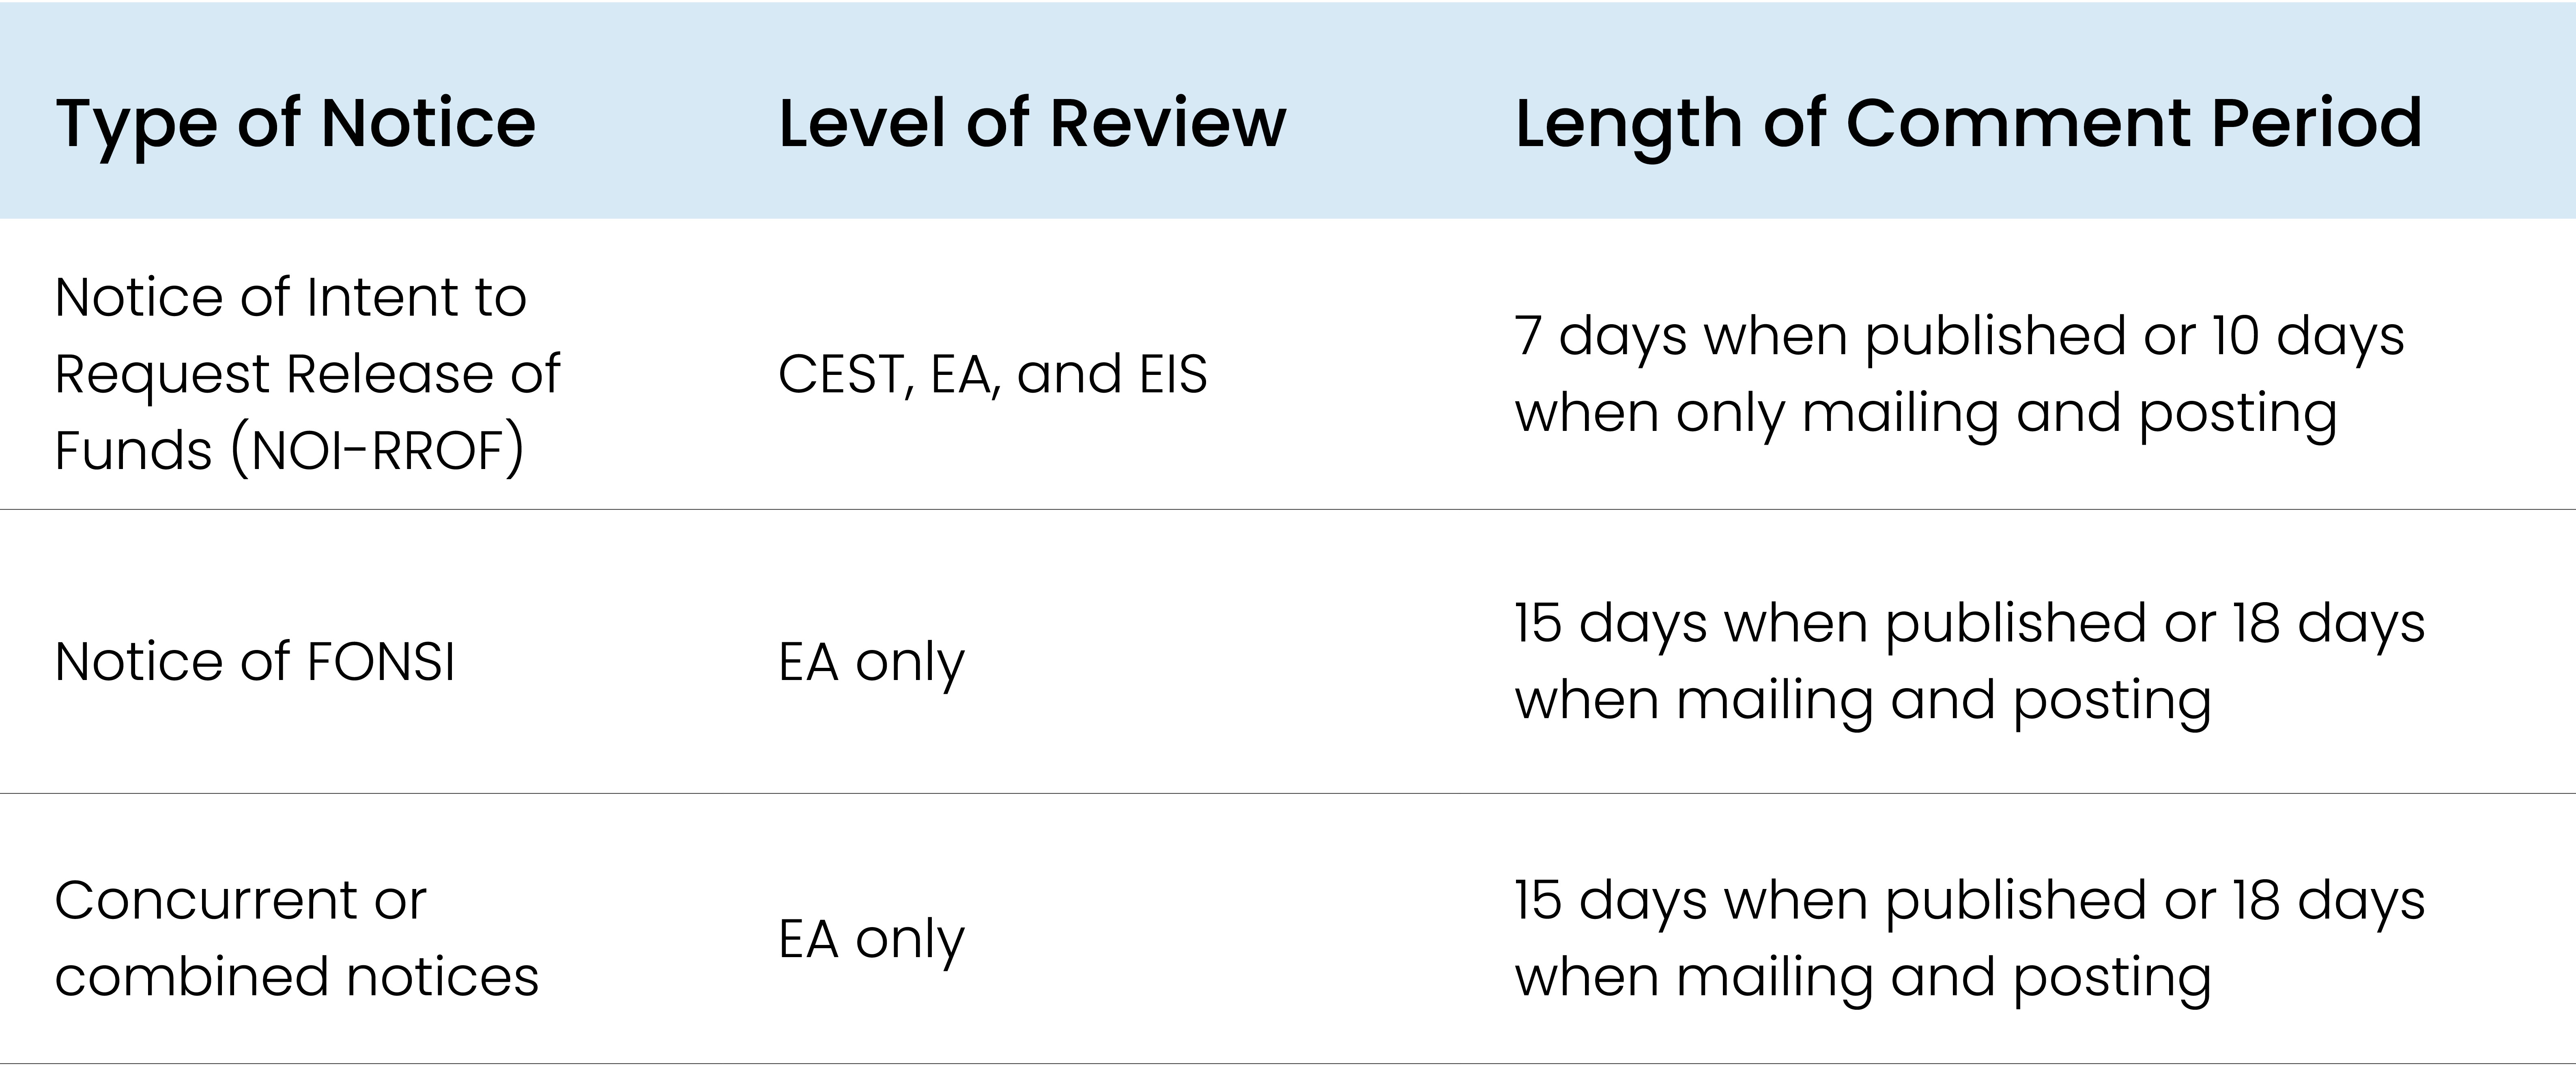 Table summarizing information about the environmental review process. The table has three columns. The first column lists the type of notice. The second column lists the level of review. The third column lists the length of the comment period. When you click on the image, it will open a new window displaying accessibility text details.